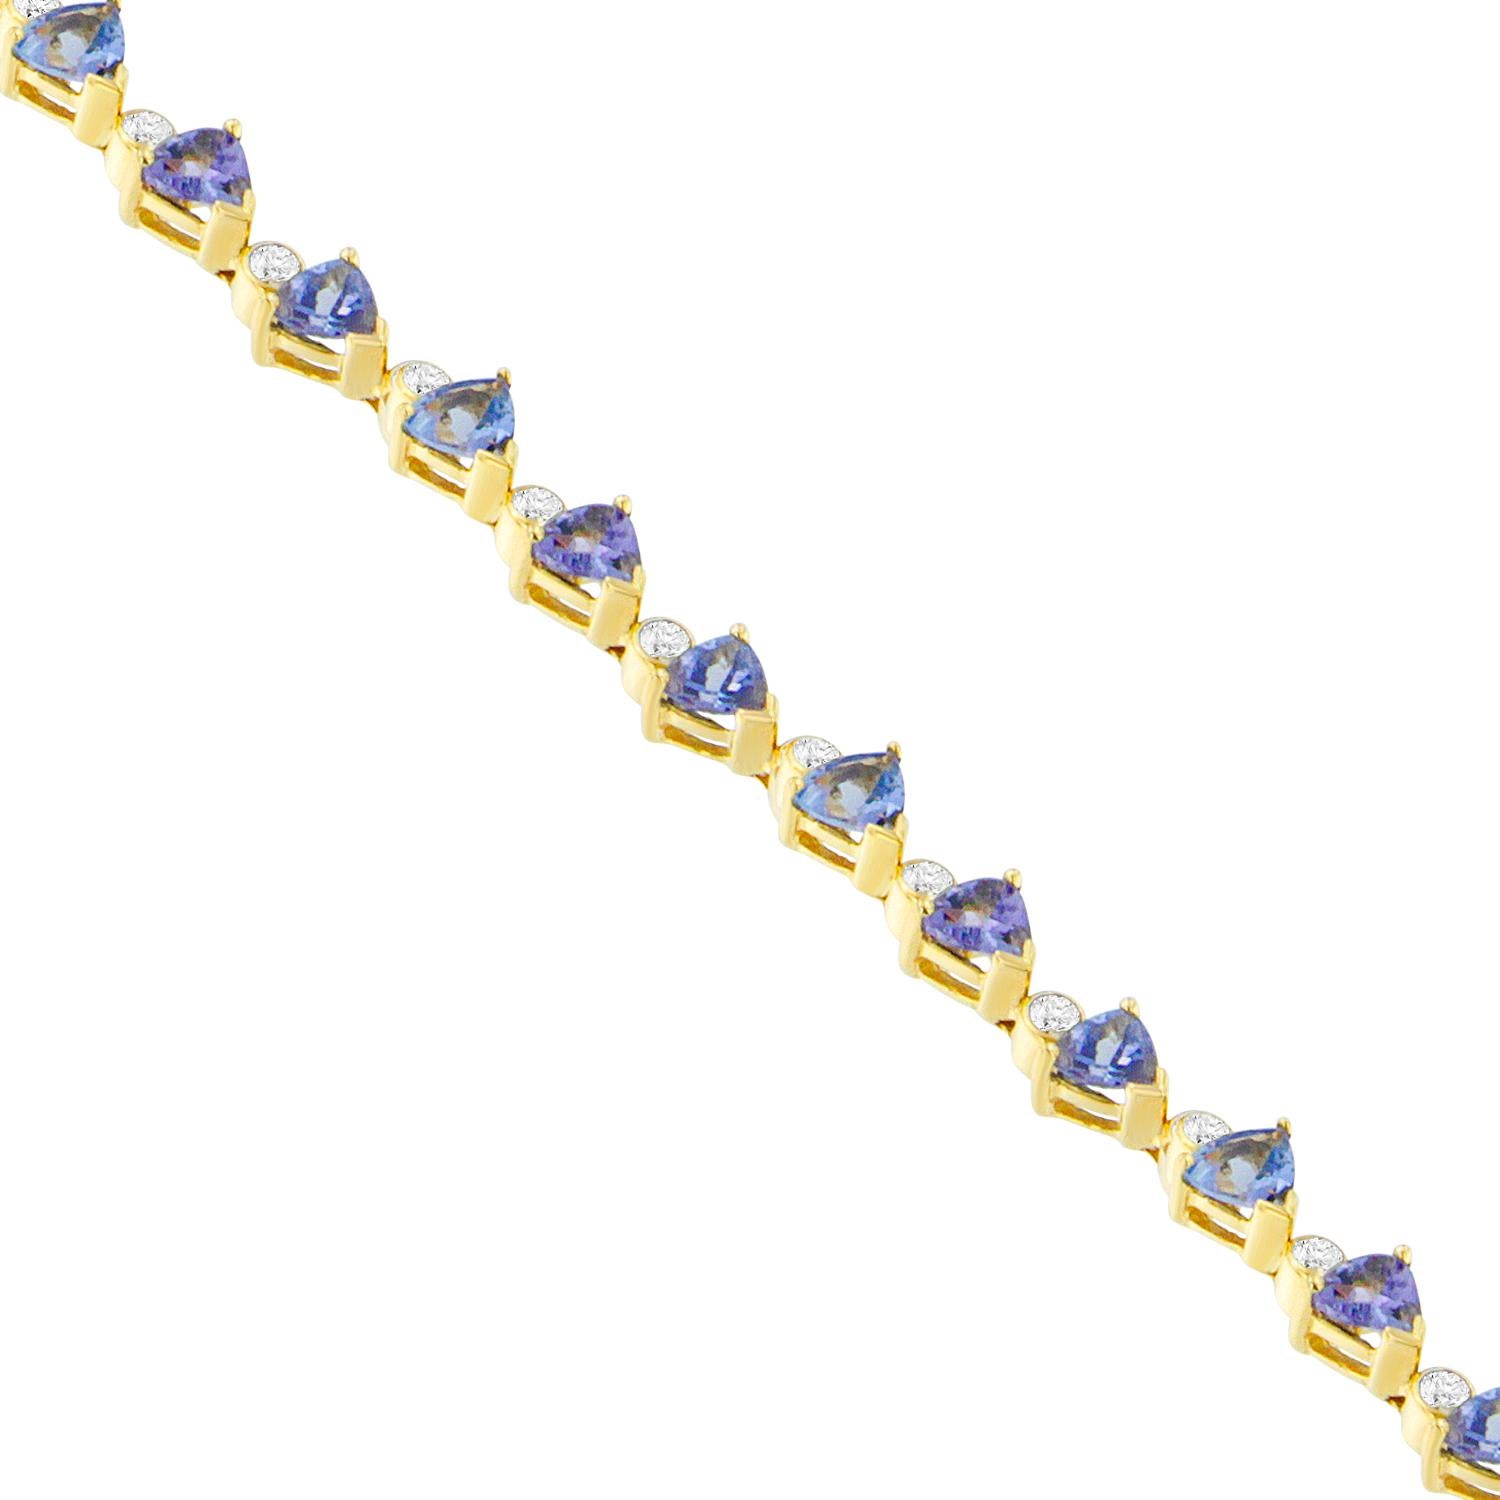 Subtle and elegance abounds in this chic fashion bracelet. Crafted of 14 karats yellow gold, alternating geometric patterns are set with dazzling round cut diamonds. Further, the setting with precious tanzanite gemstones in a triangular shape lends